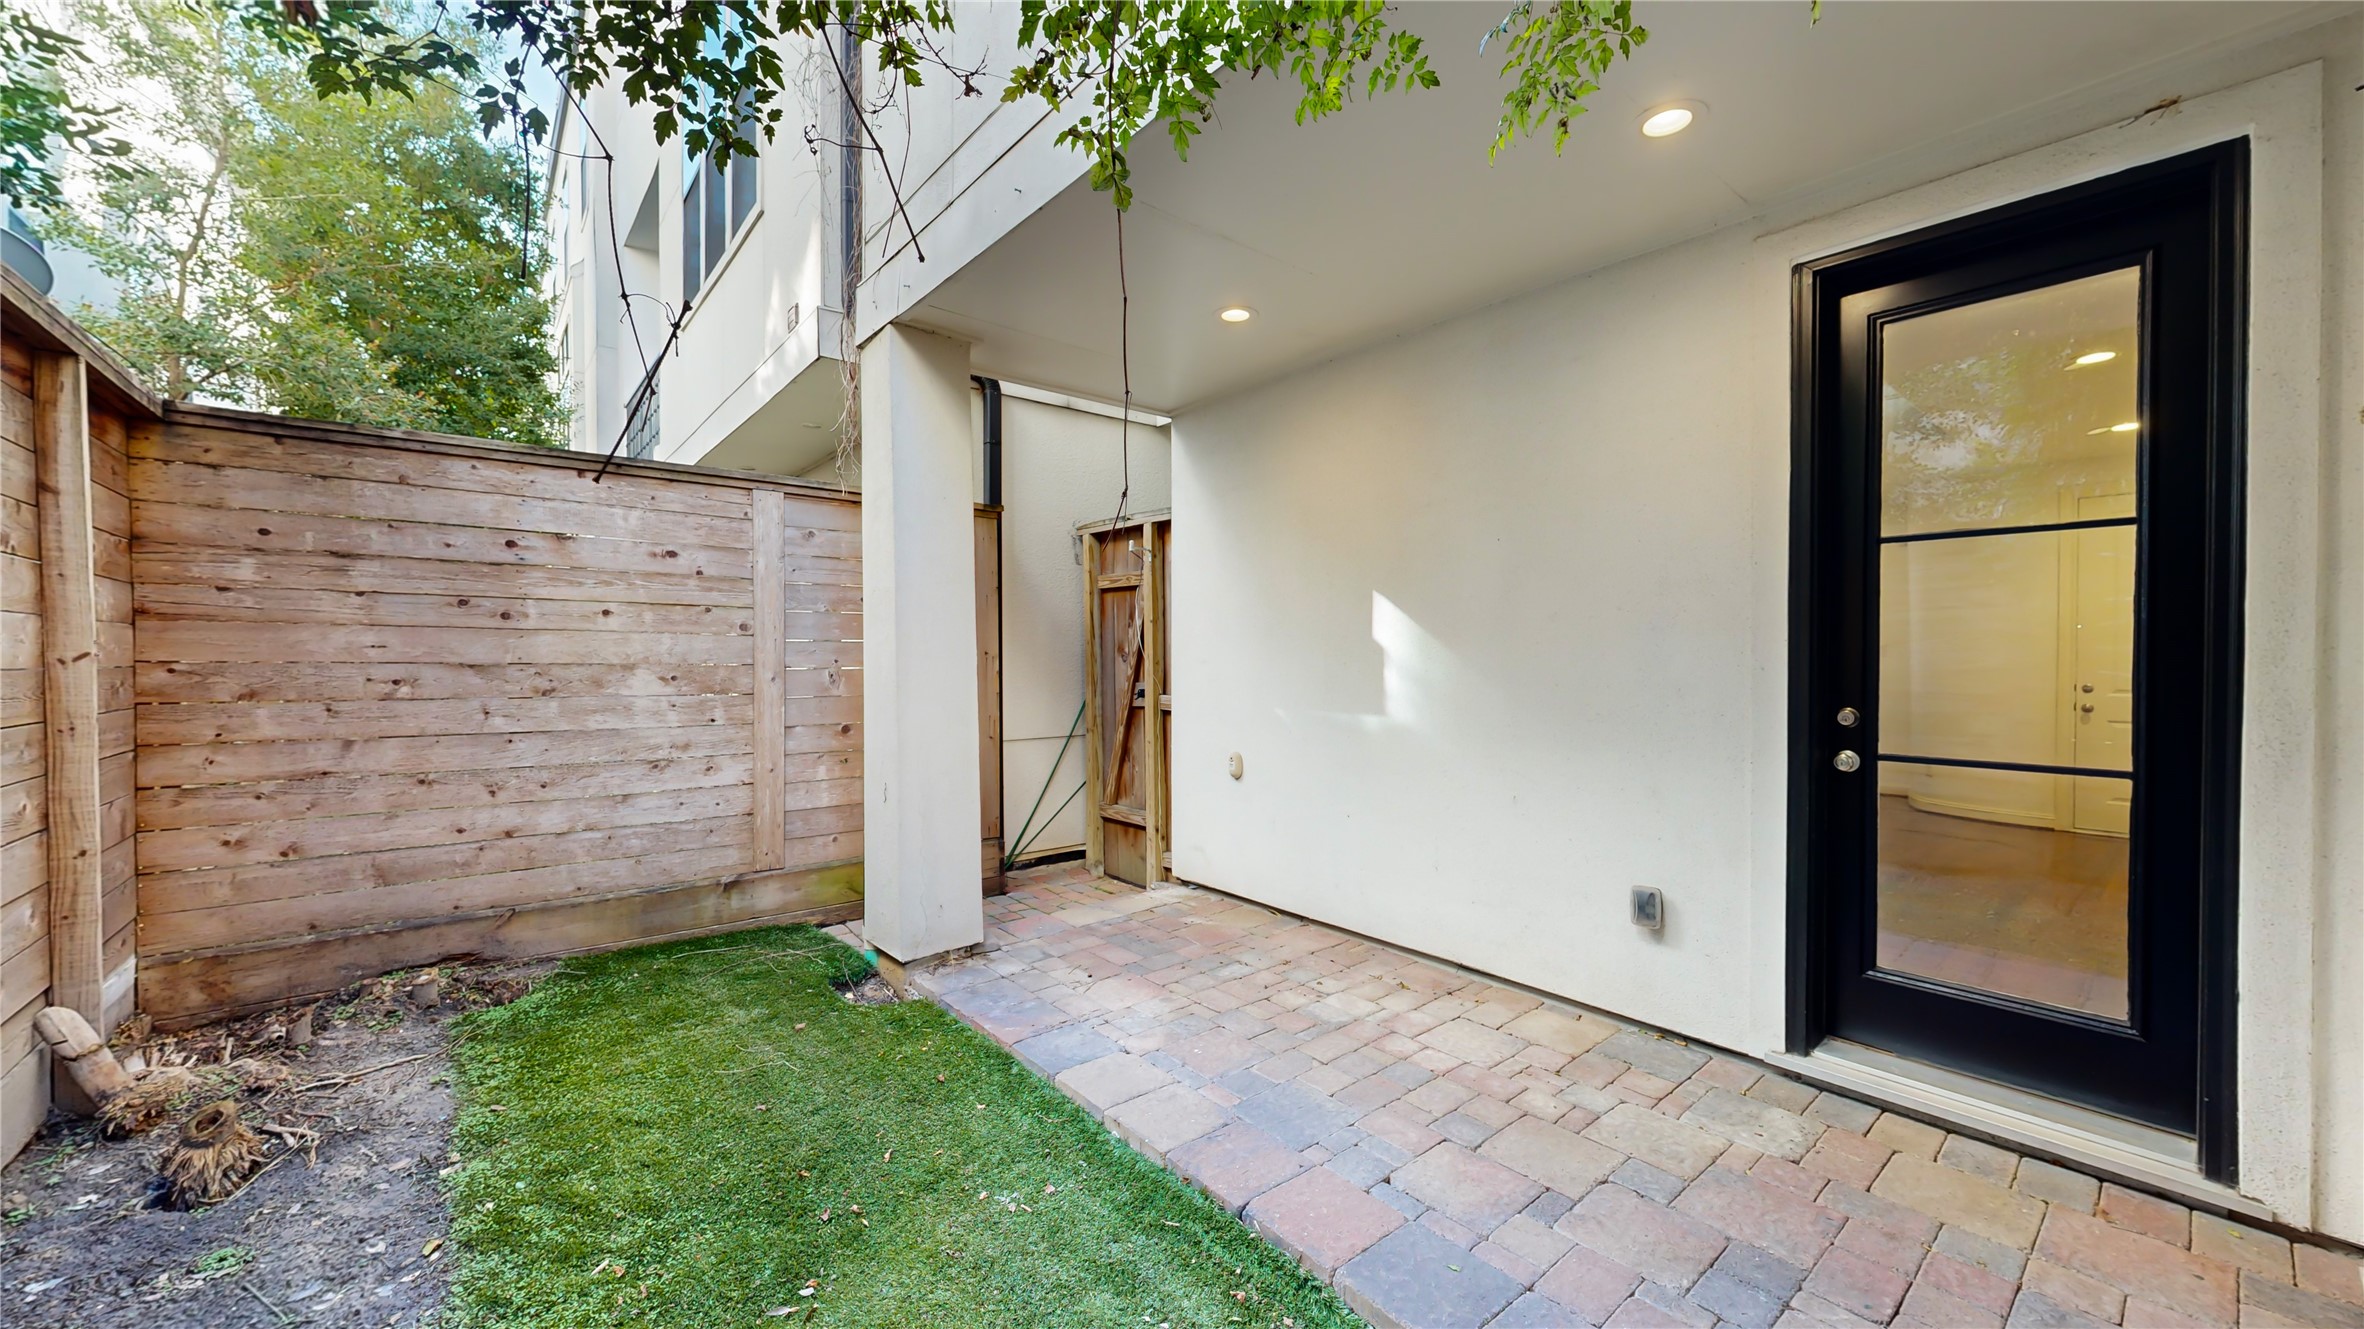 If having an incredible roof top terrace and large balcony wasn't enough, you also have your very own private back yard with a covered patio. This home leaves nothing to be desired, so schedule your showing today!